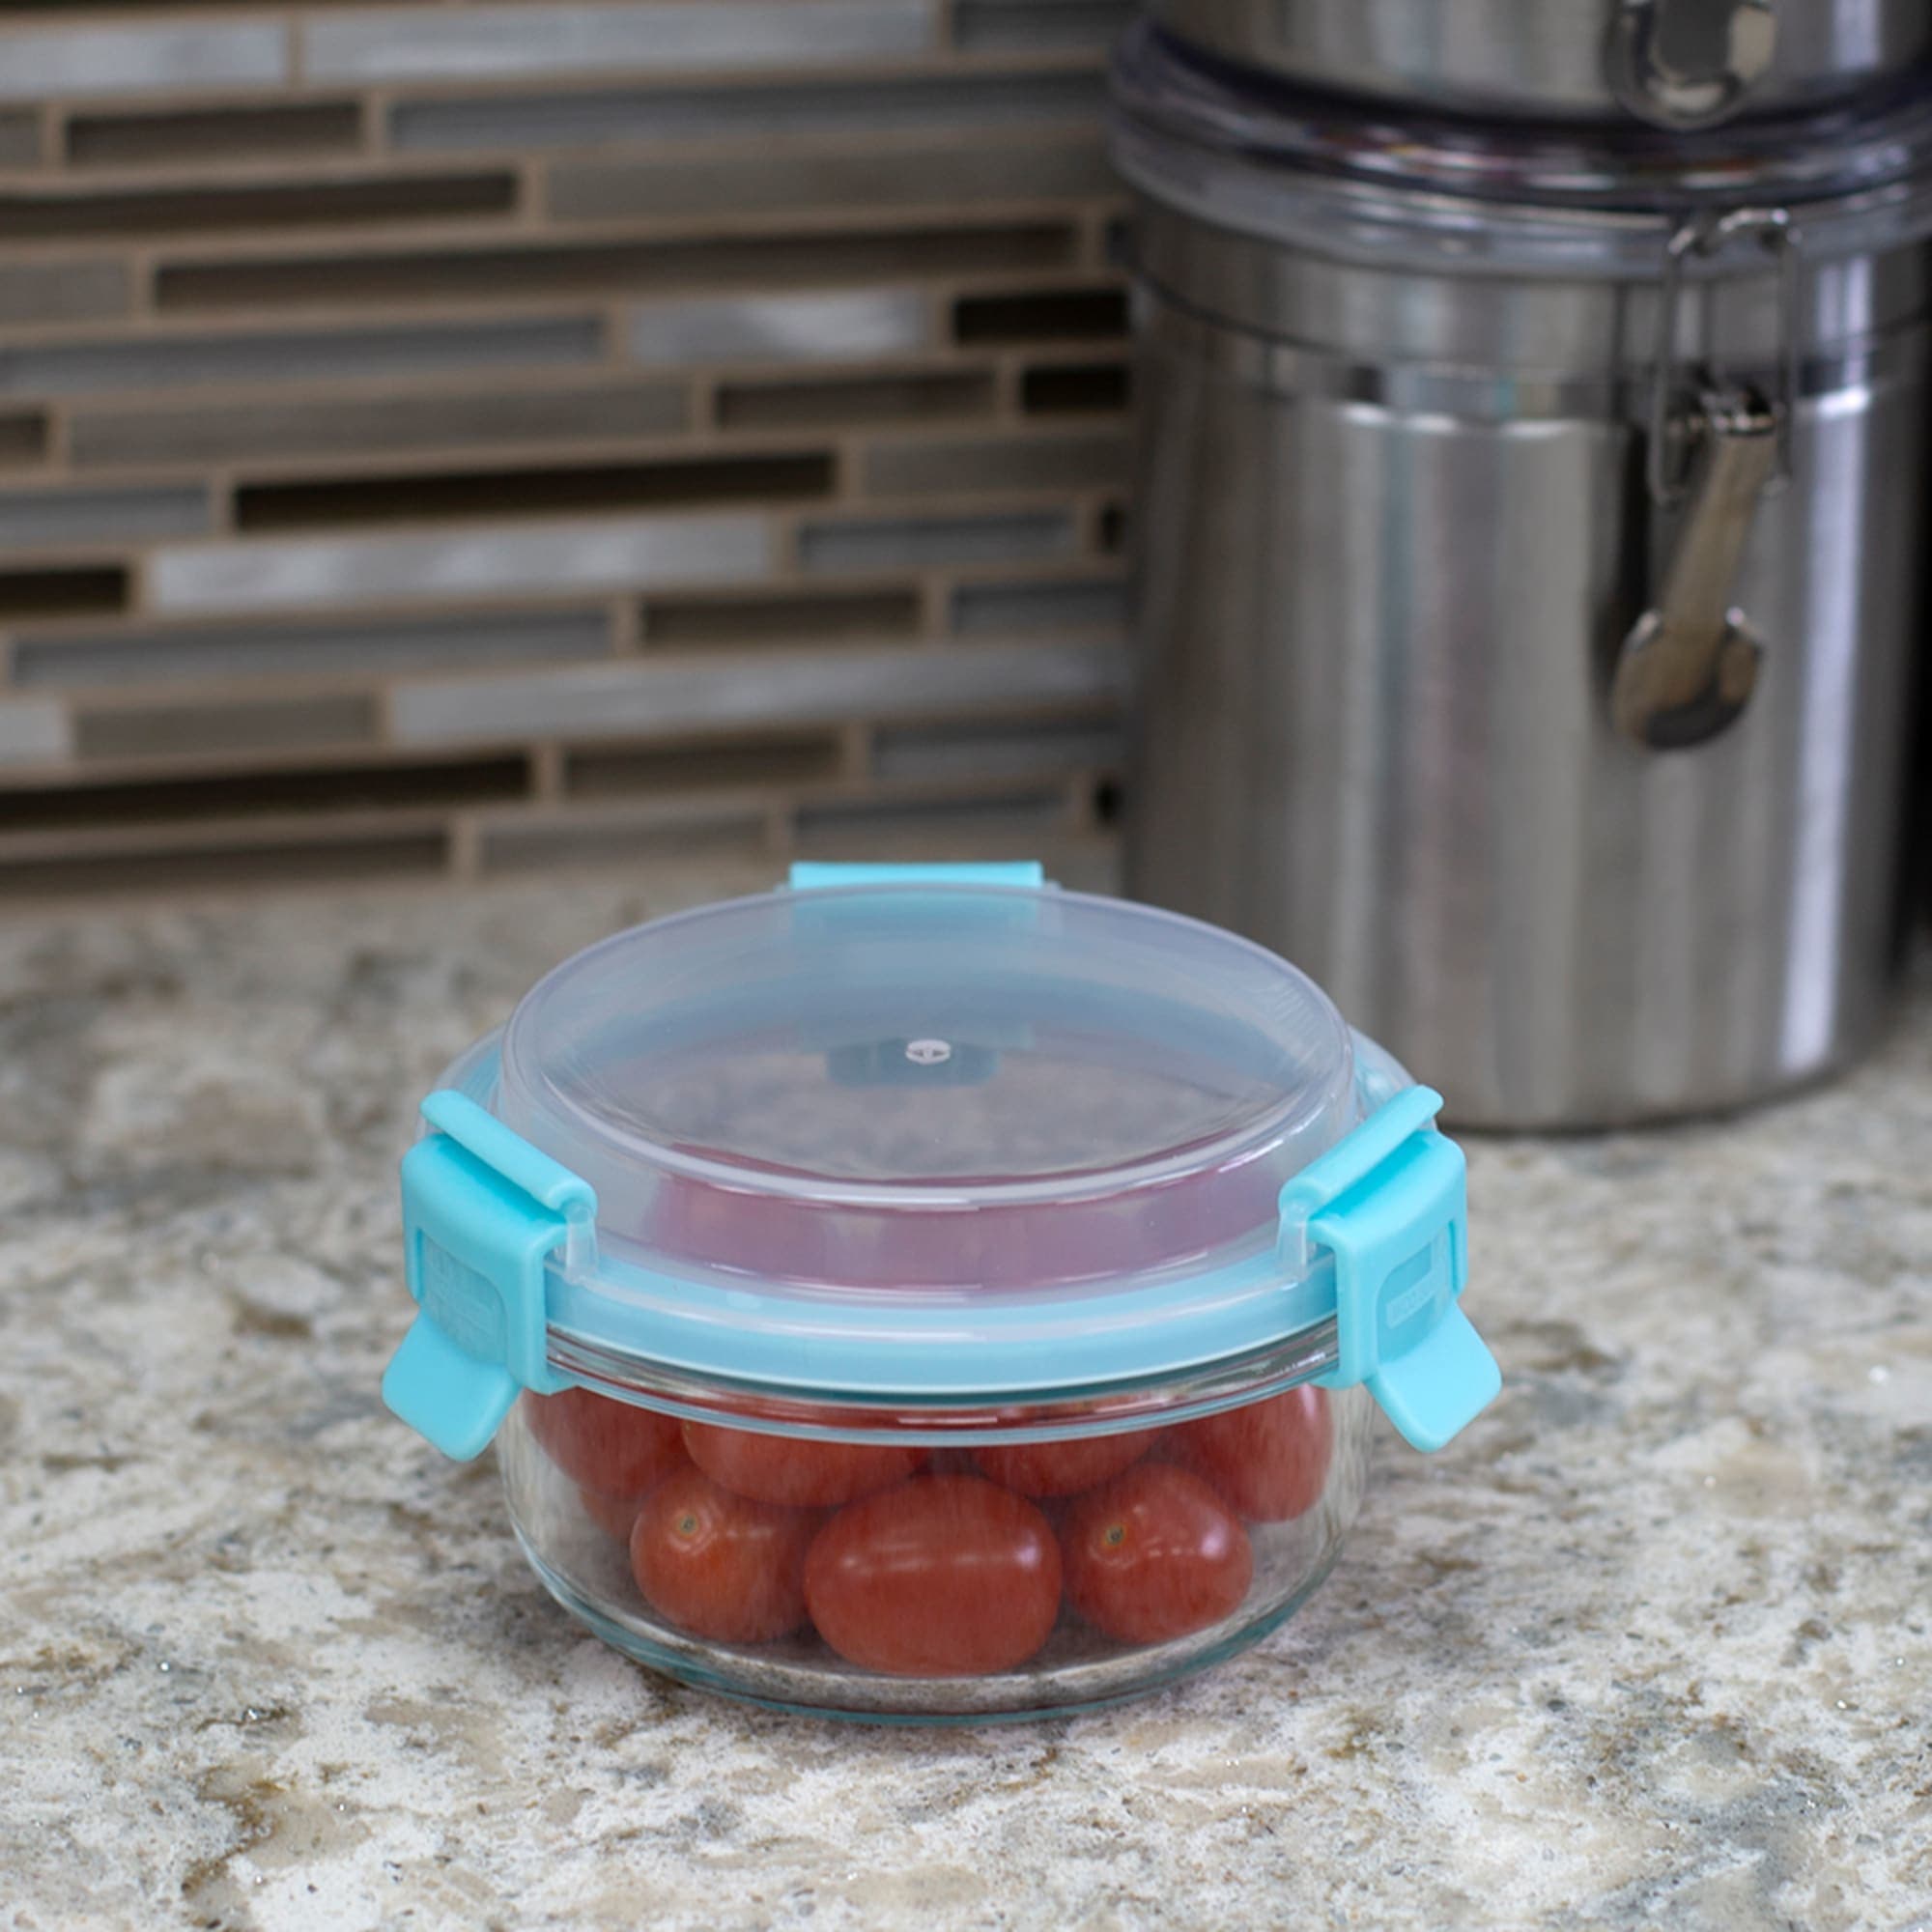 Home Basics Leak Proof 13 oz.  Round Borosilicate Glass Food Storage Container with Air-tight Plastic Lid, Turquoise $3.00 EACH, CASE PACK OF 12